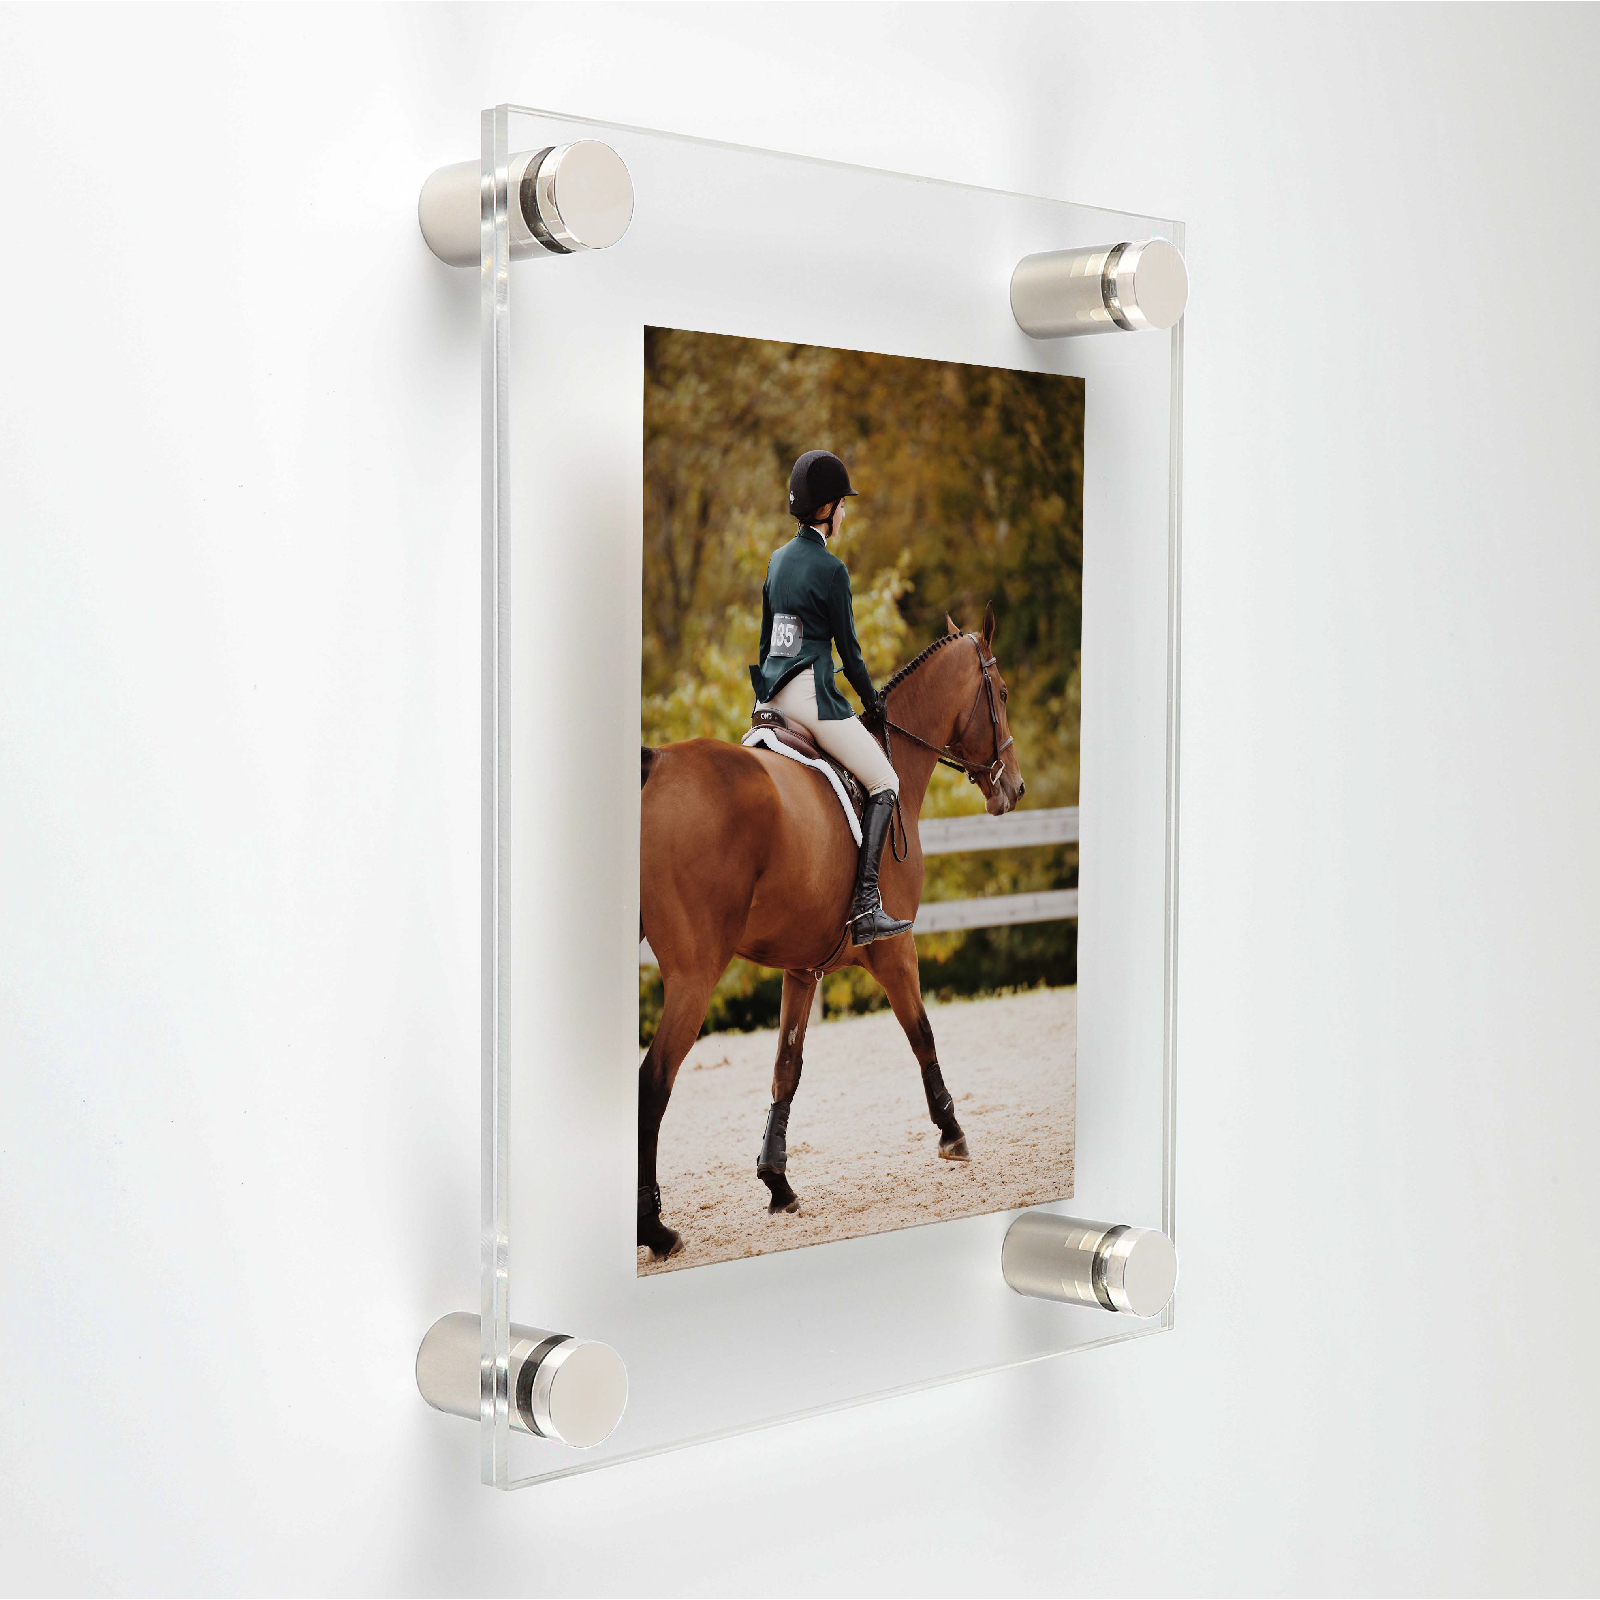 (2) 27'' x 39'' Clear Acrylics , Pre-Drilled With Polished Edges (Thick 3/16'' each), Wall Frame with (6) 3/4'' x 1'' Polished Stainless Steel Standoffs includes Screws and Anchors